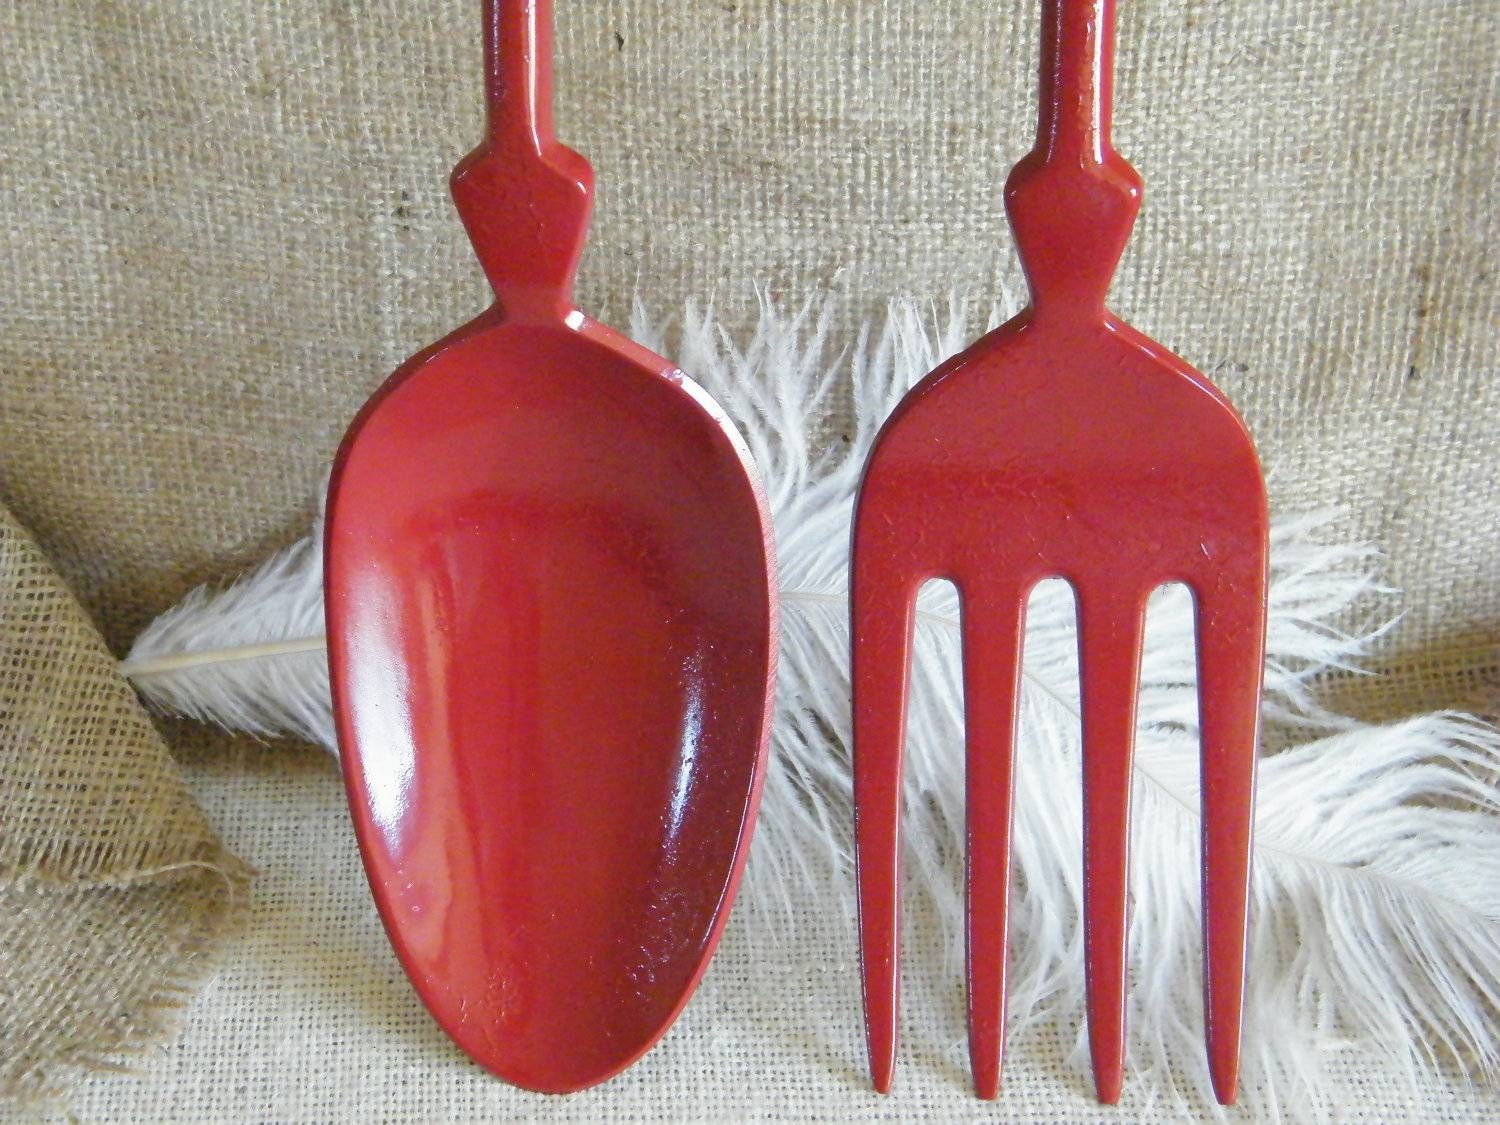 Oversized Spoon And Fork Wall Decor | Home Decor And Design Throughout Current Oversized Cutlery Wall Art (View 4 of 20)